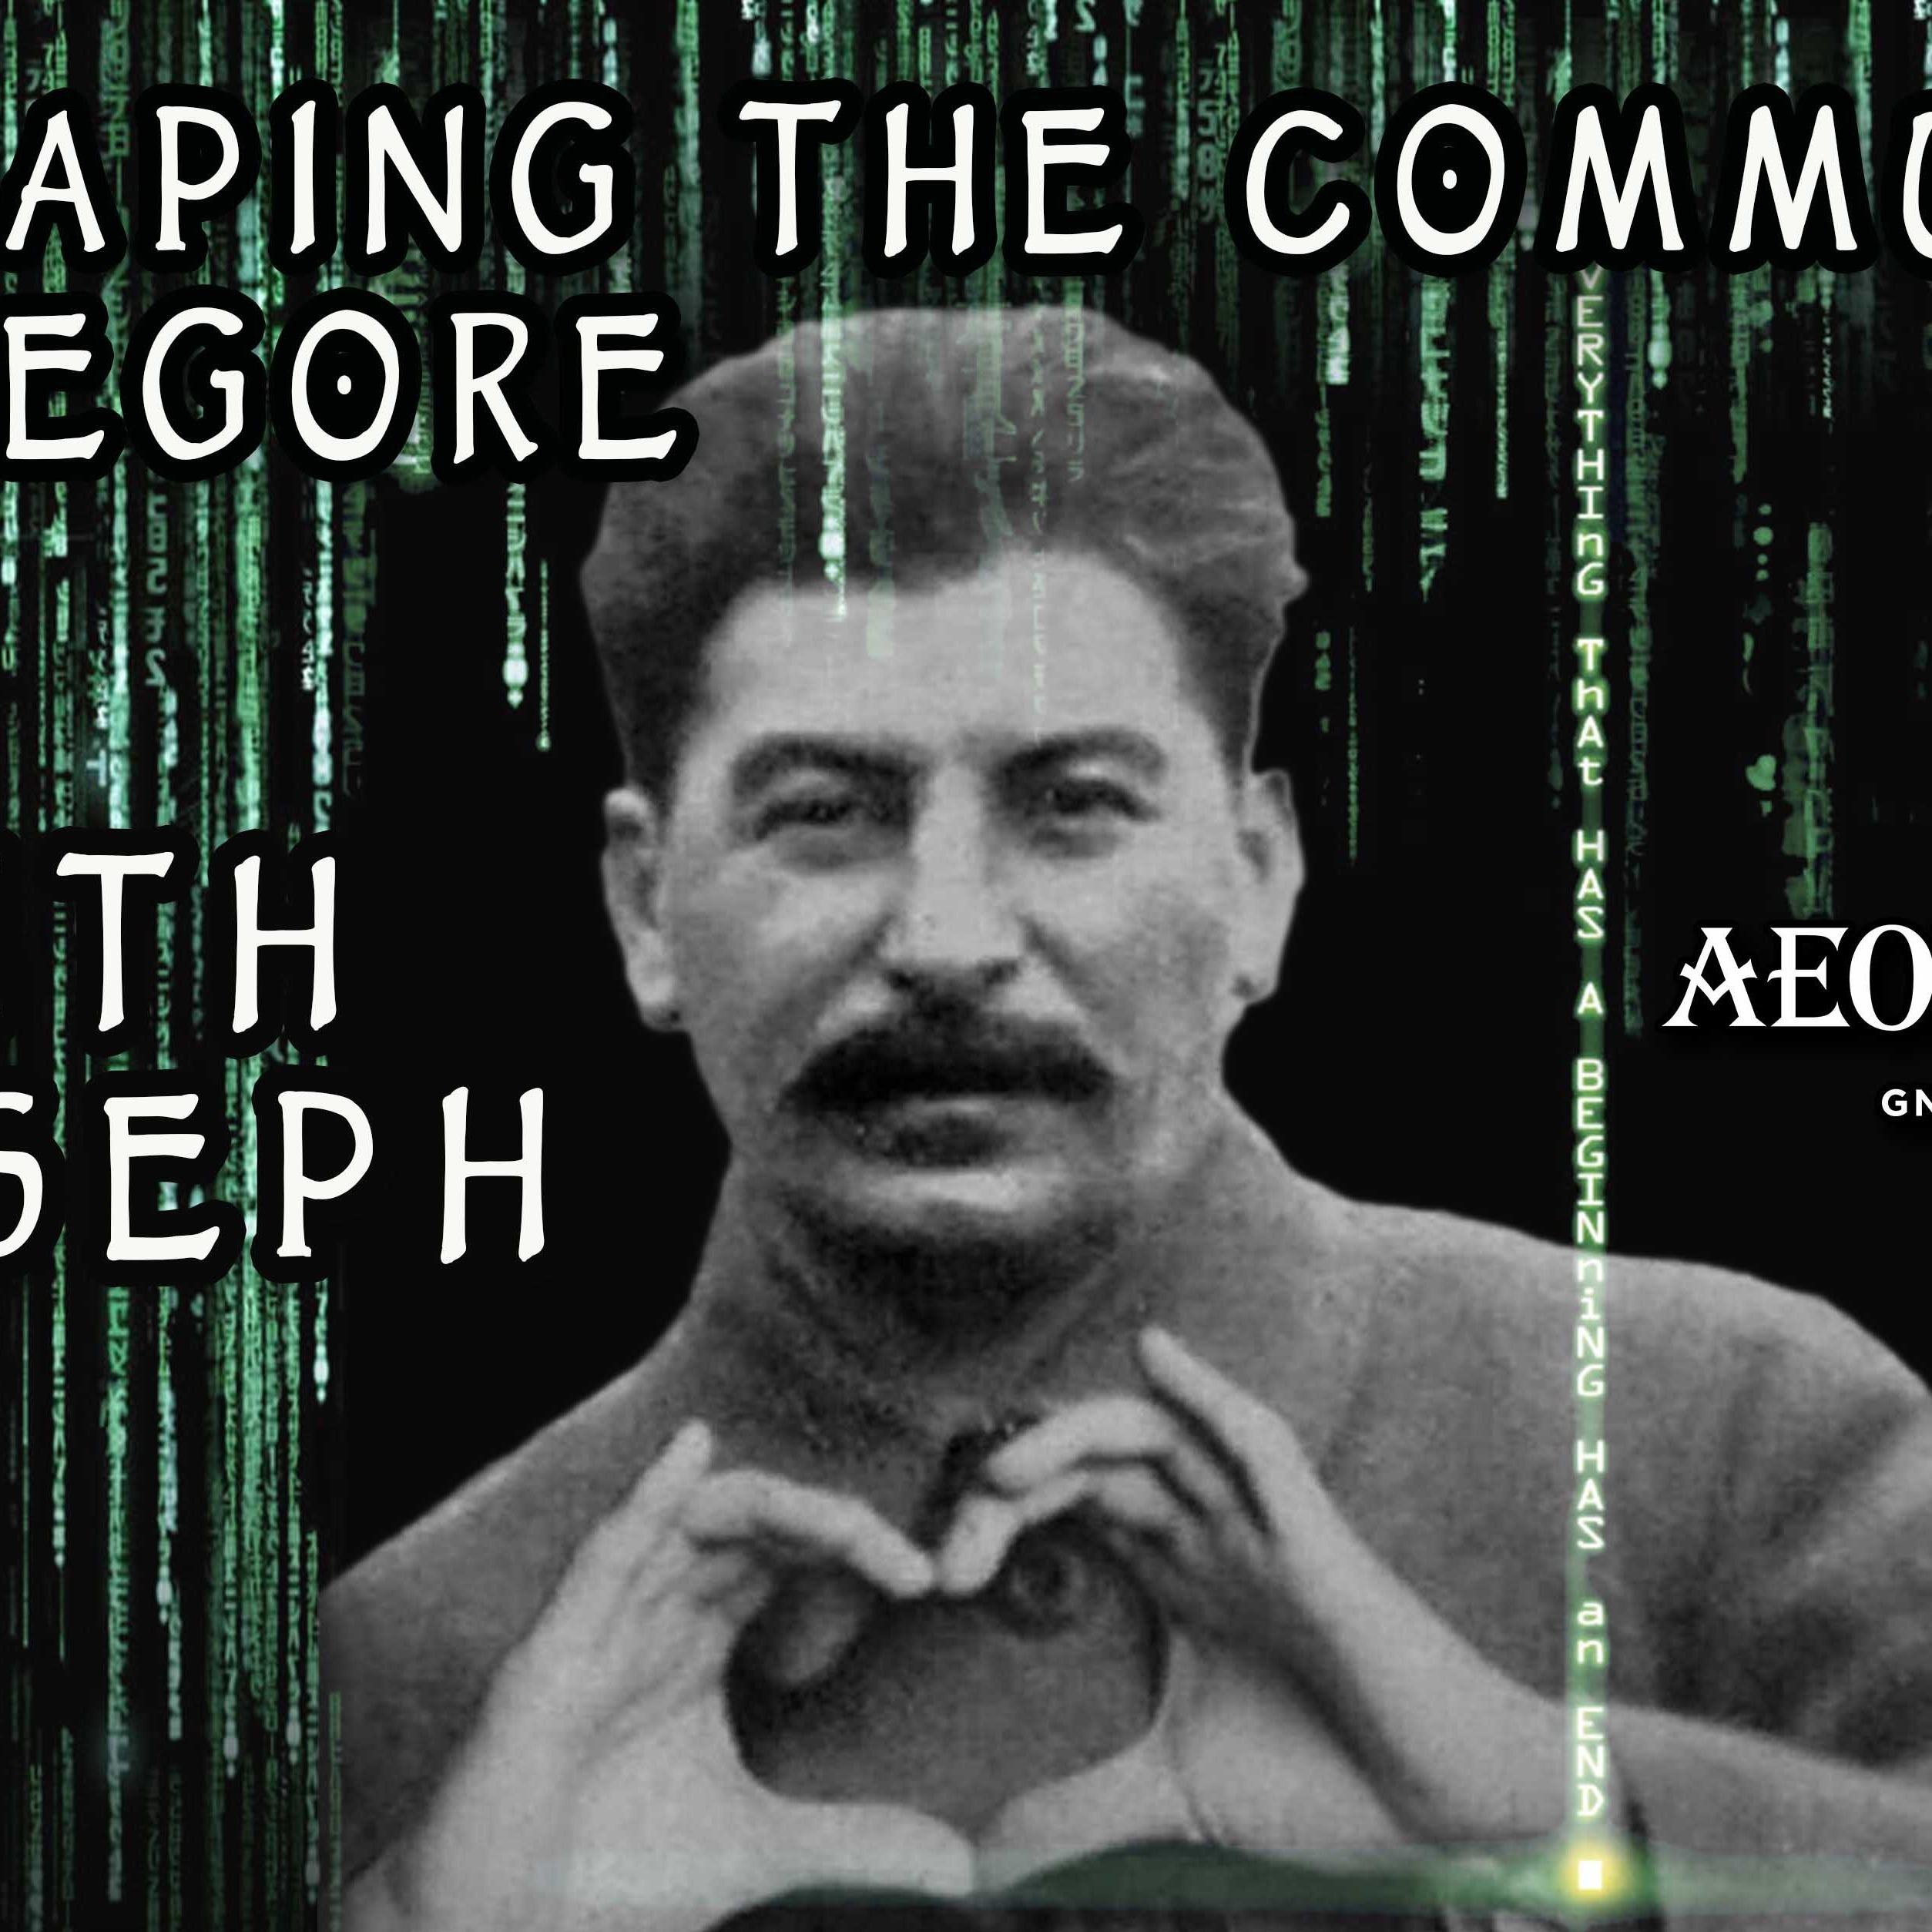 Keith Joseph on Escaping the Communist Egregore